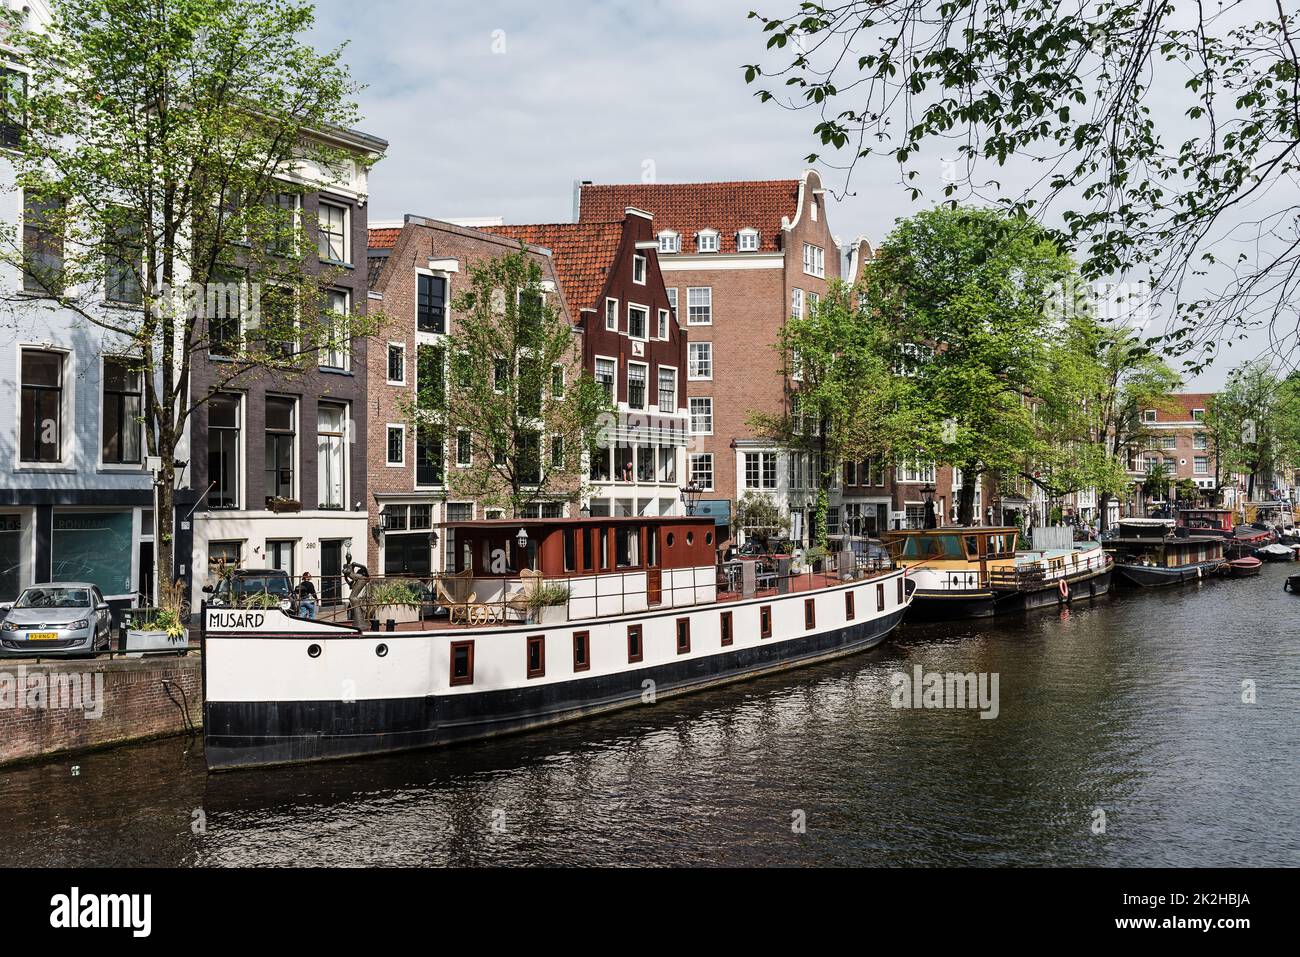 Amsterdam, Netherlands - May 7, 2022: Scenic view of canal with typical Dutch and boats houses in early morning Stock Photo